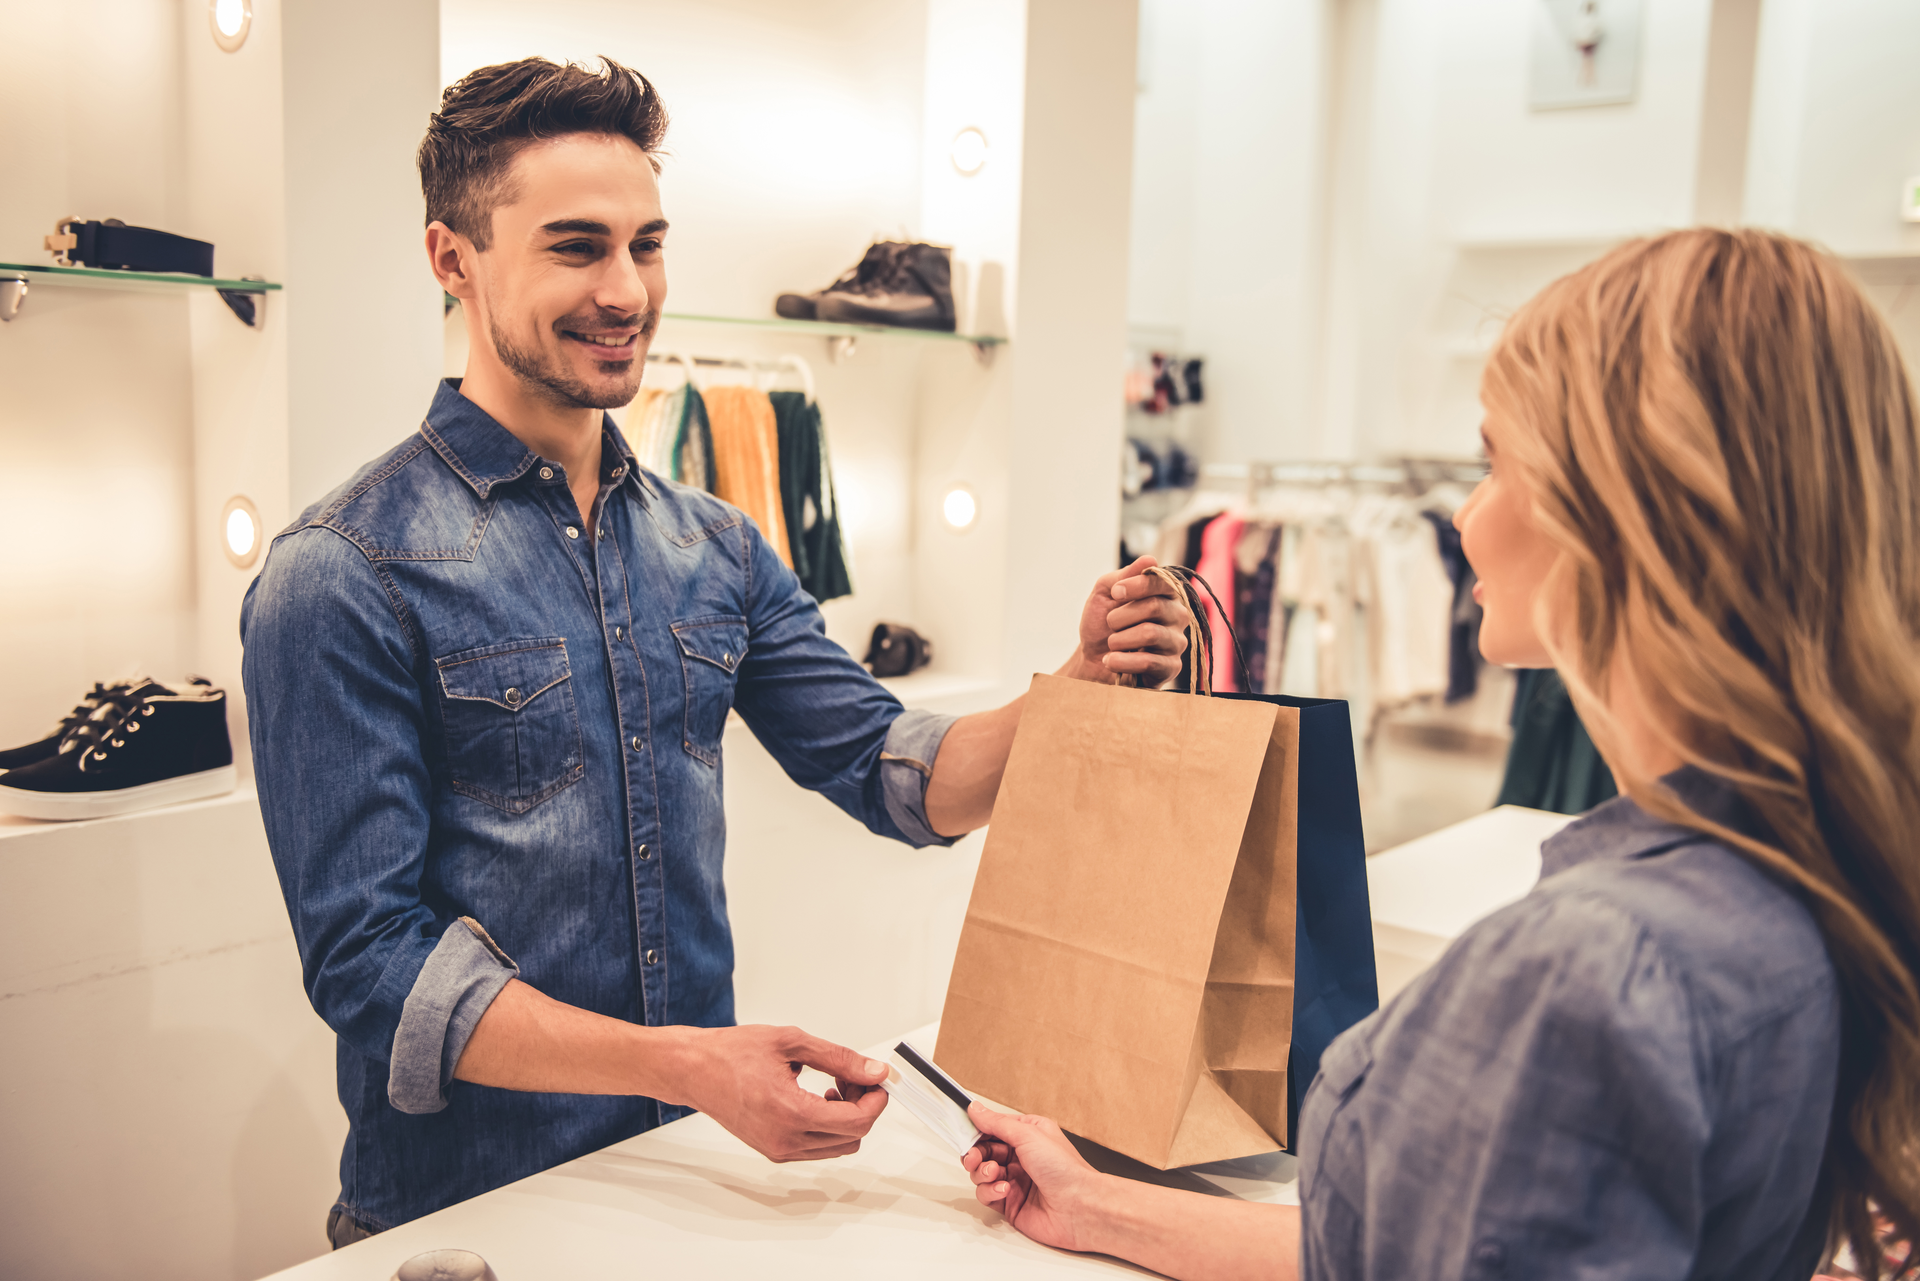 Most effective retail strategies for small businesses